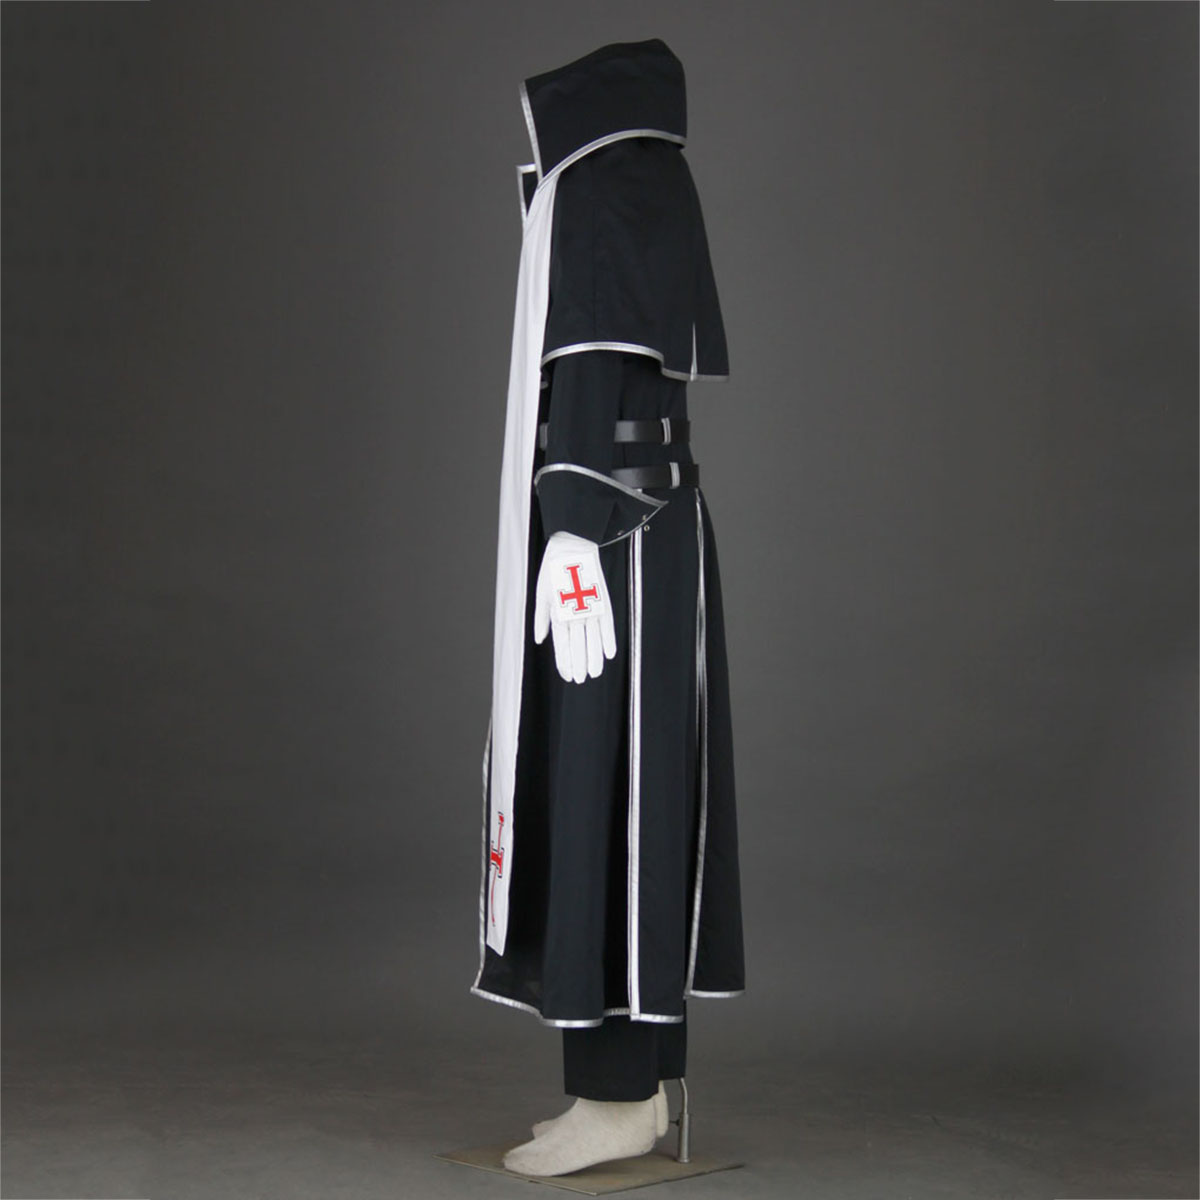 Trinity Blood Tres Iqus 1 Cosplay Costumes AU